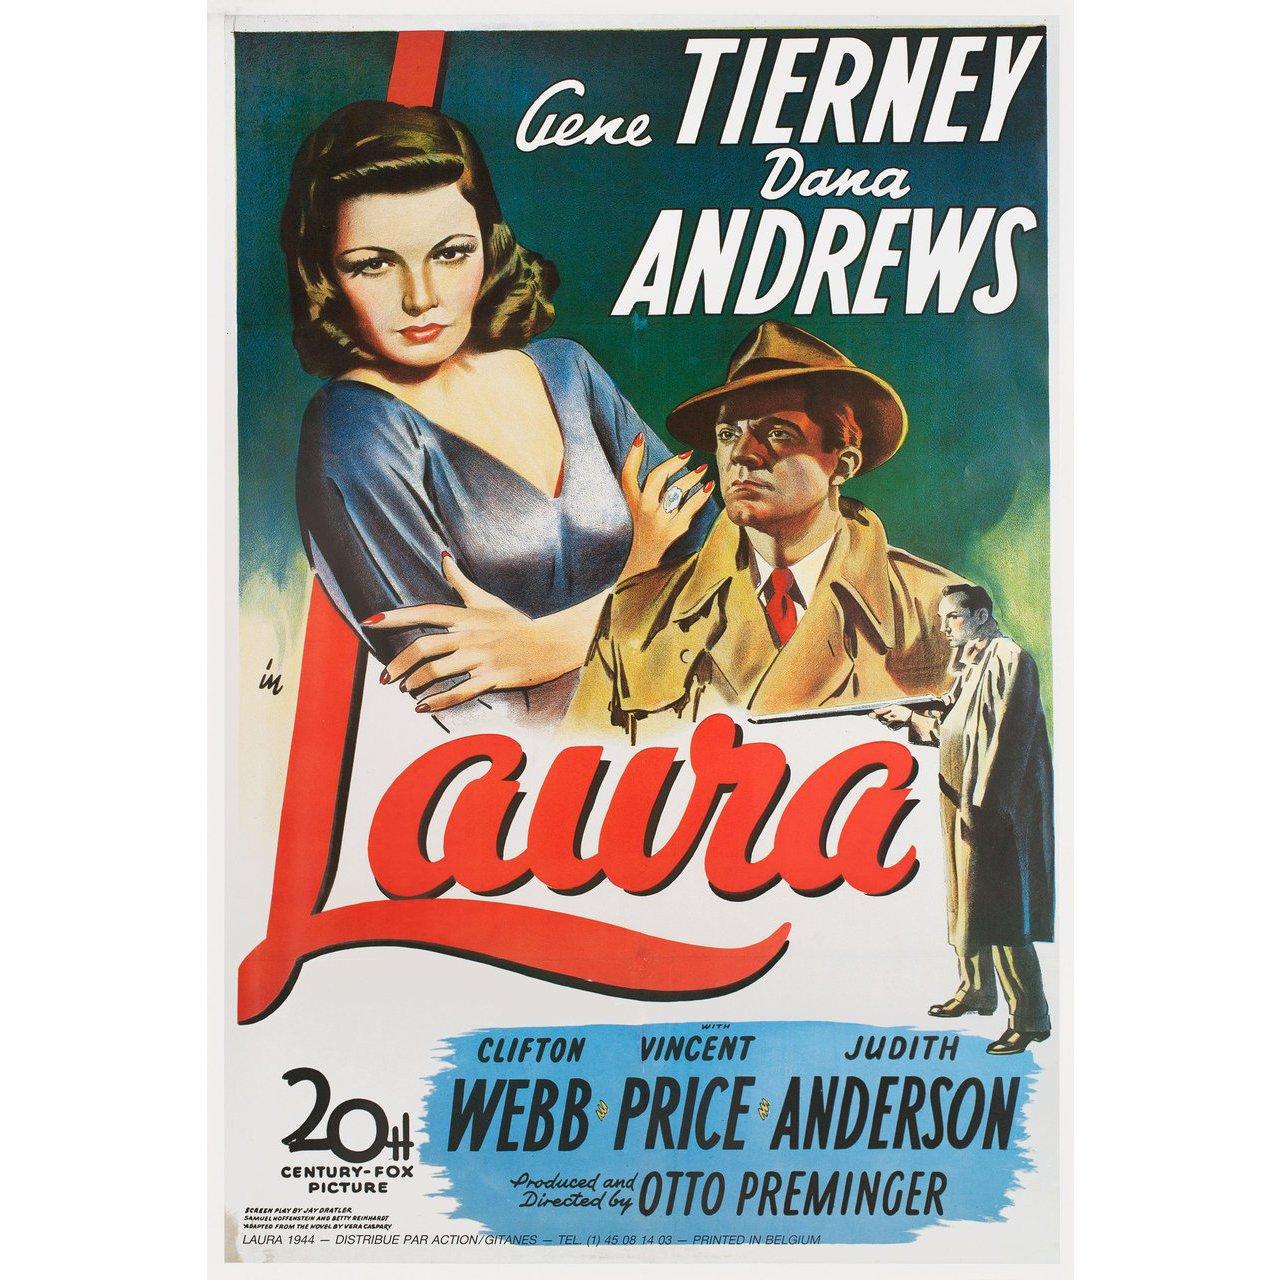 Original 1990s re-release Belgian B1 poster for the 1944 film Laura directed by Otto Preminger with Gene Tierney / Dana Andrews / Clifton Webb / Vincent Price. Very Good-Fine condition, rolled. Please note: the size is stated in inches and the